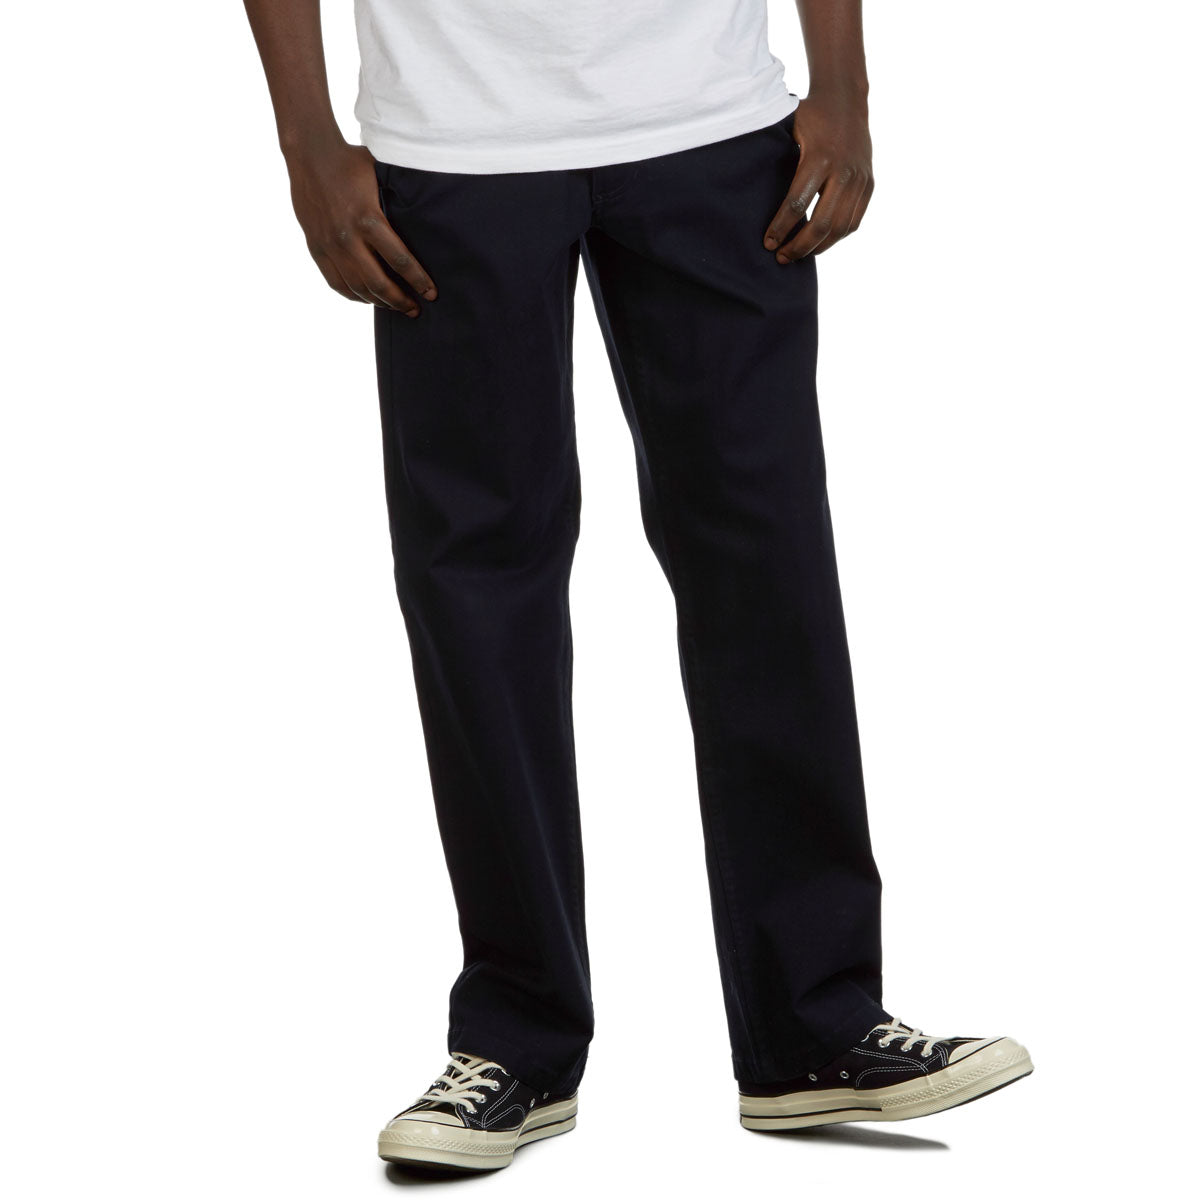 CCS Standard Plus Relaxed Chino Pants - Navy image 1